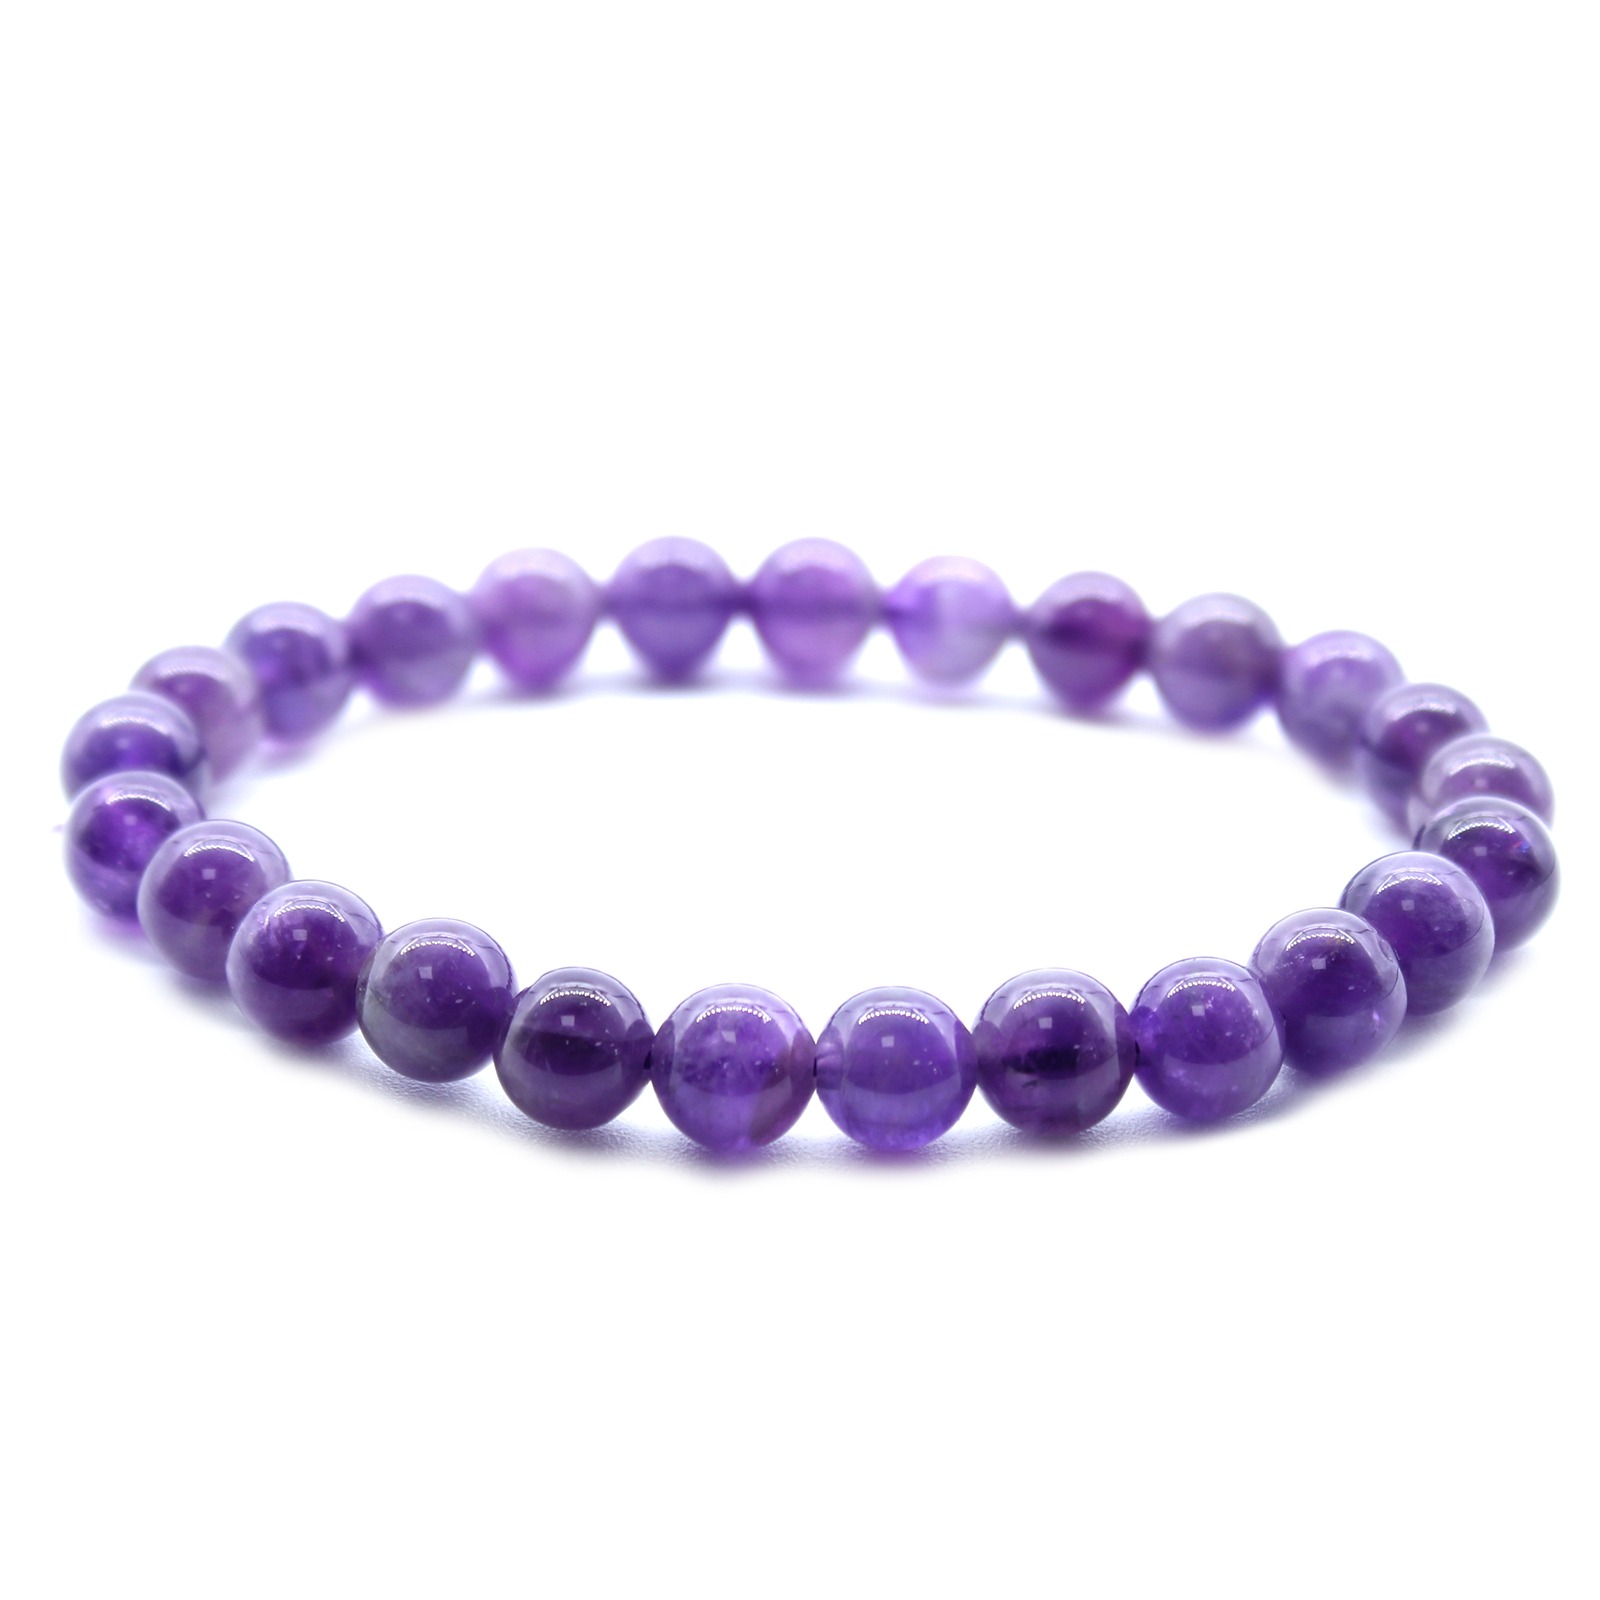 Buy Reiki Crystal Products Purple Amethyst Bracelet with 12 mm Beads for  Men and Women at Amazon.in